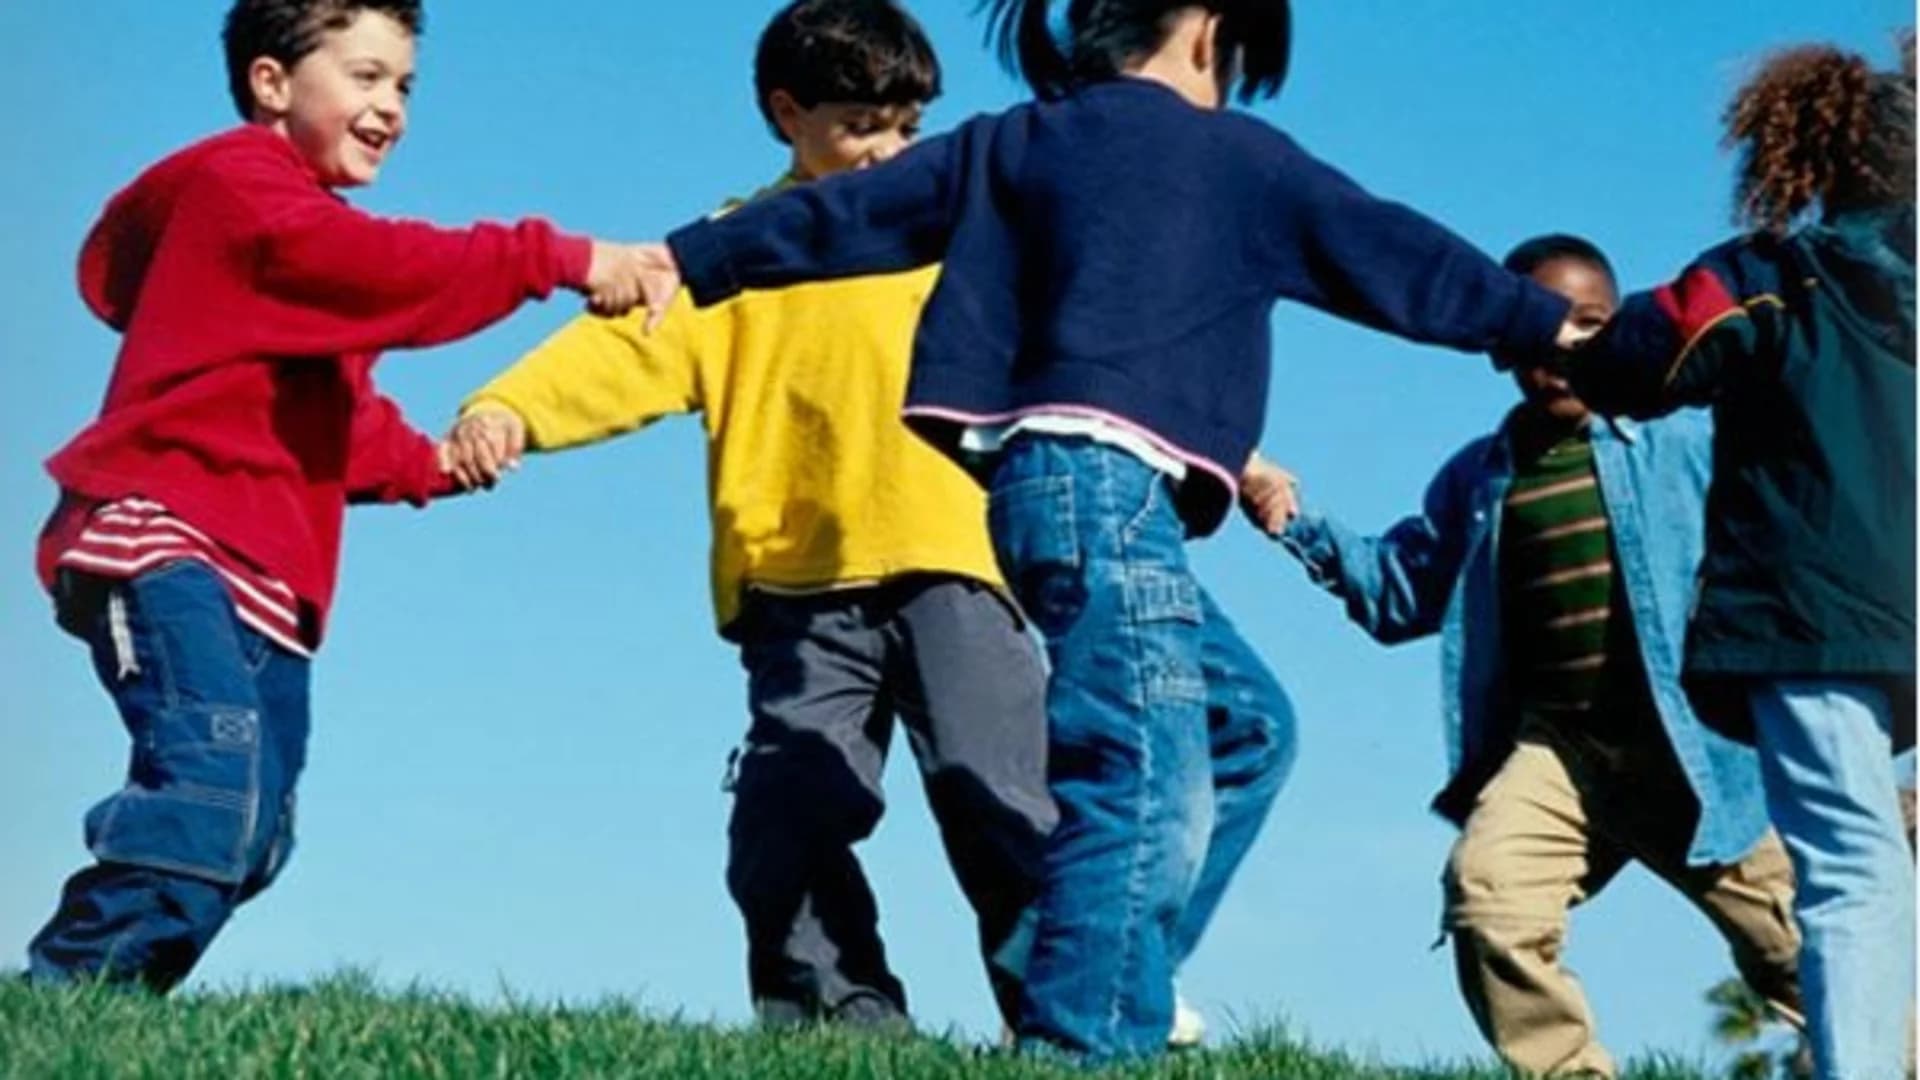 New Jersey enacts law requiring recess for students in grades K-5